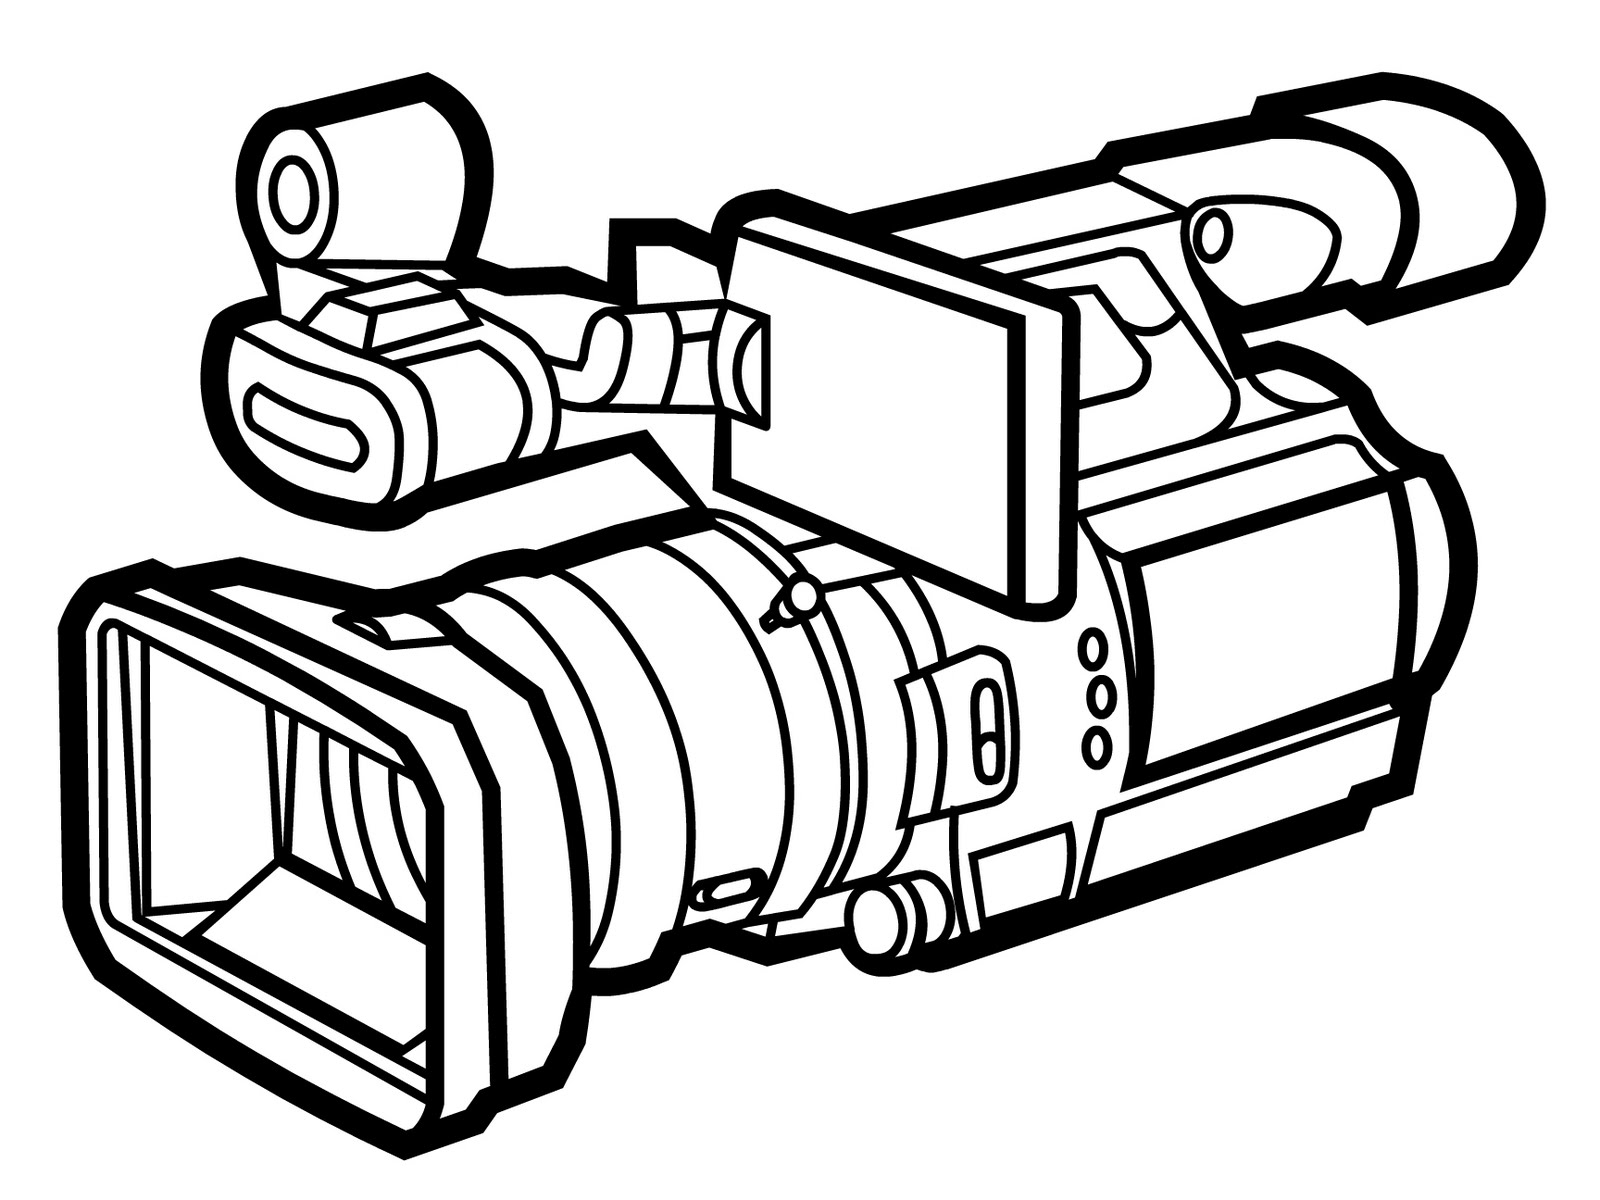 Video camera outline - Clipart library - Clipart library